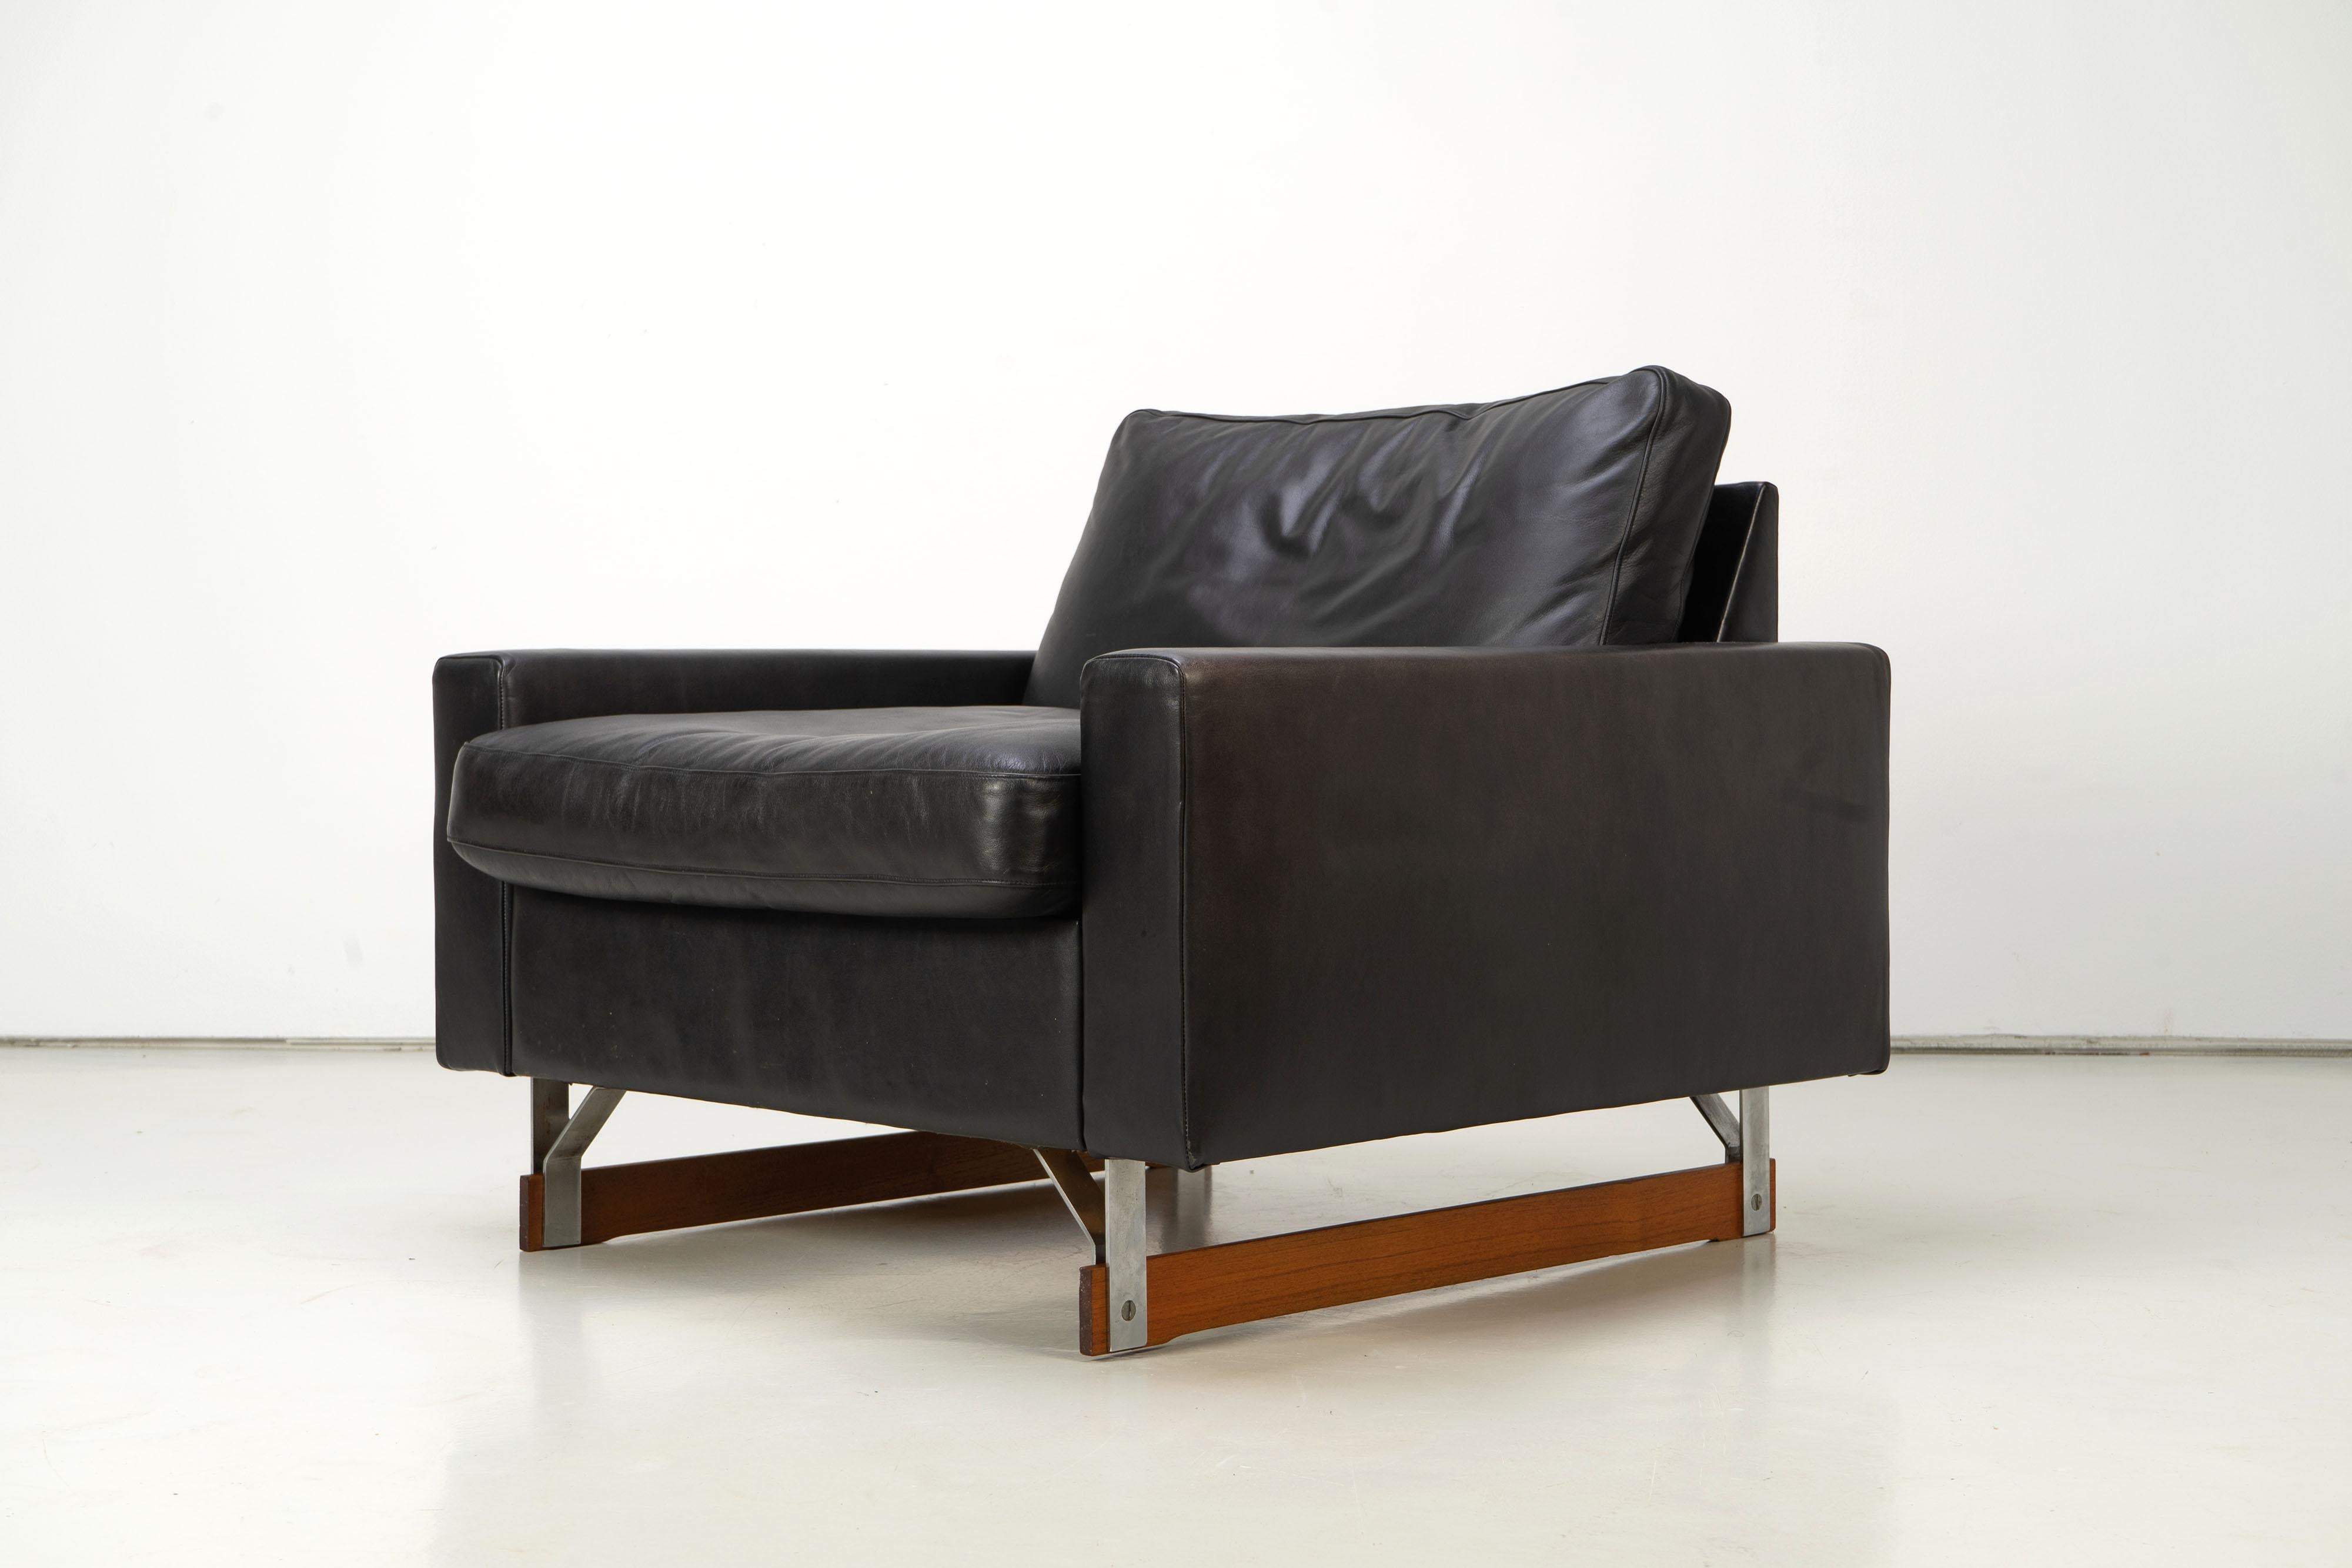 European Set of Two Mid-Century Modern Leather Club Chairs with Wooden Sleds, 1960s For Sale